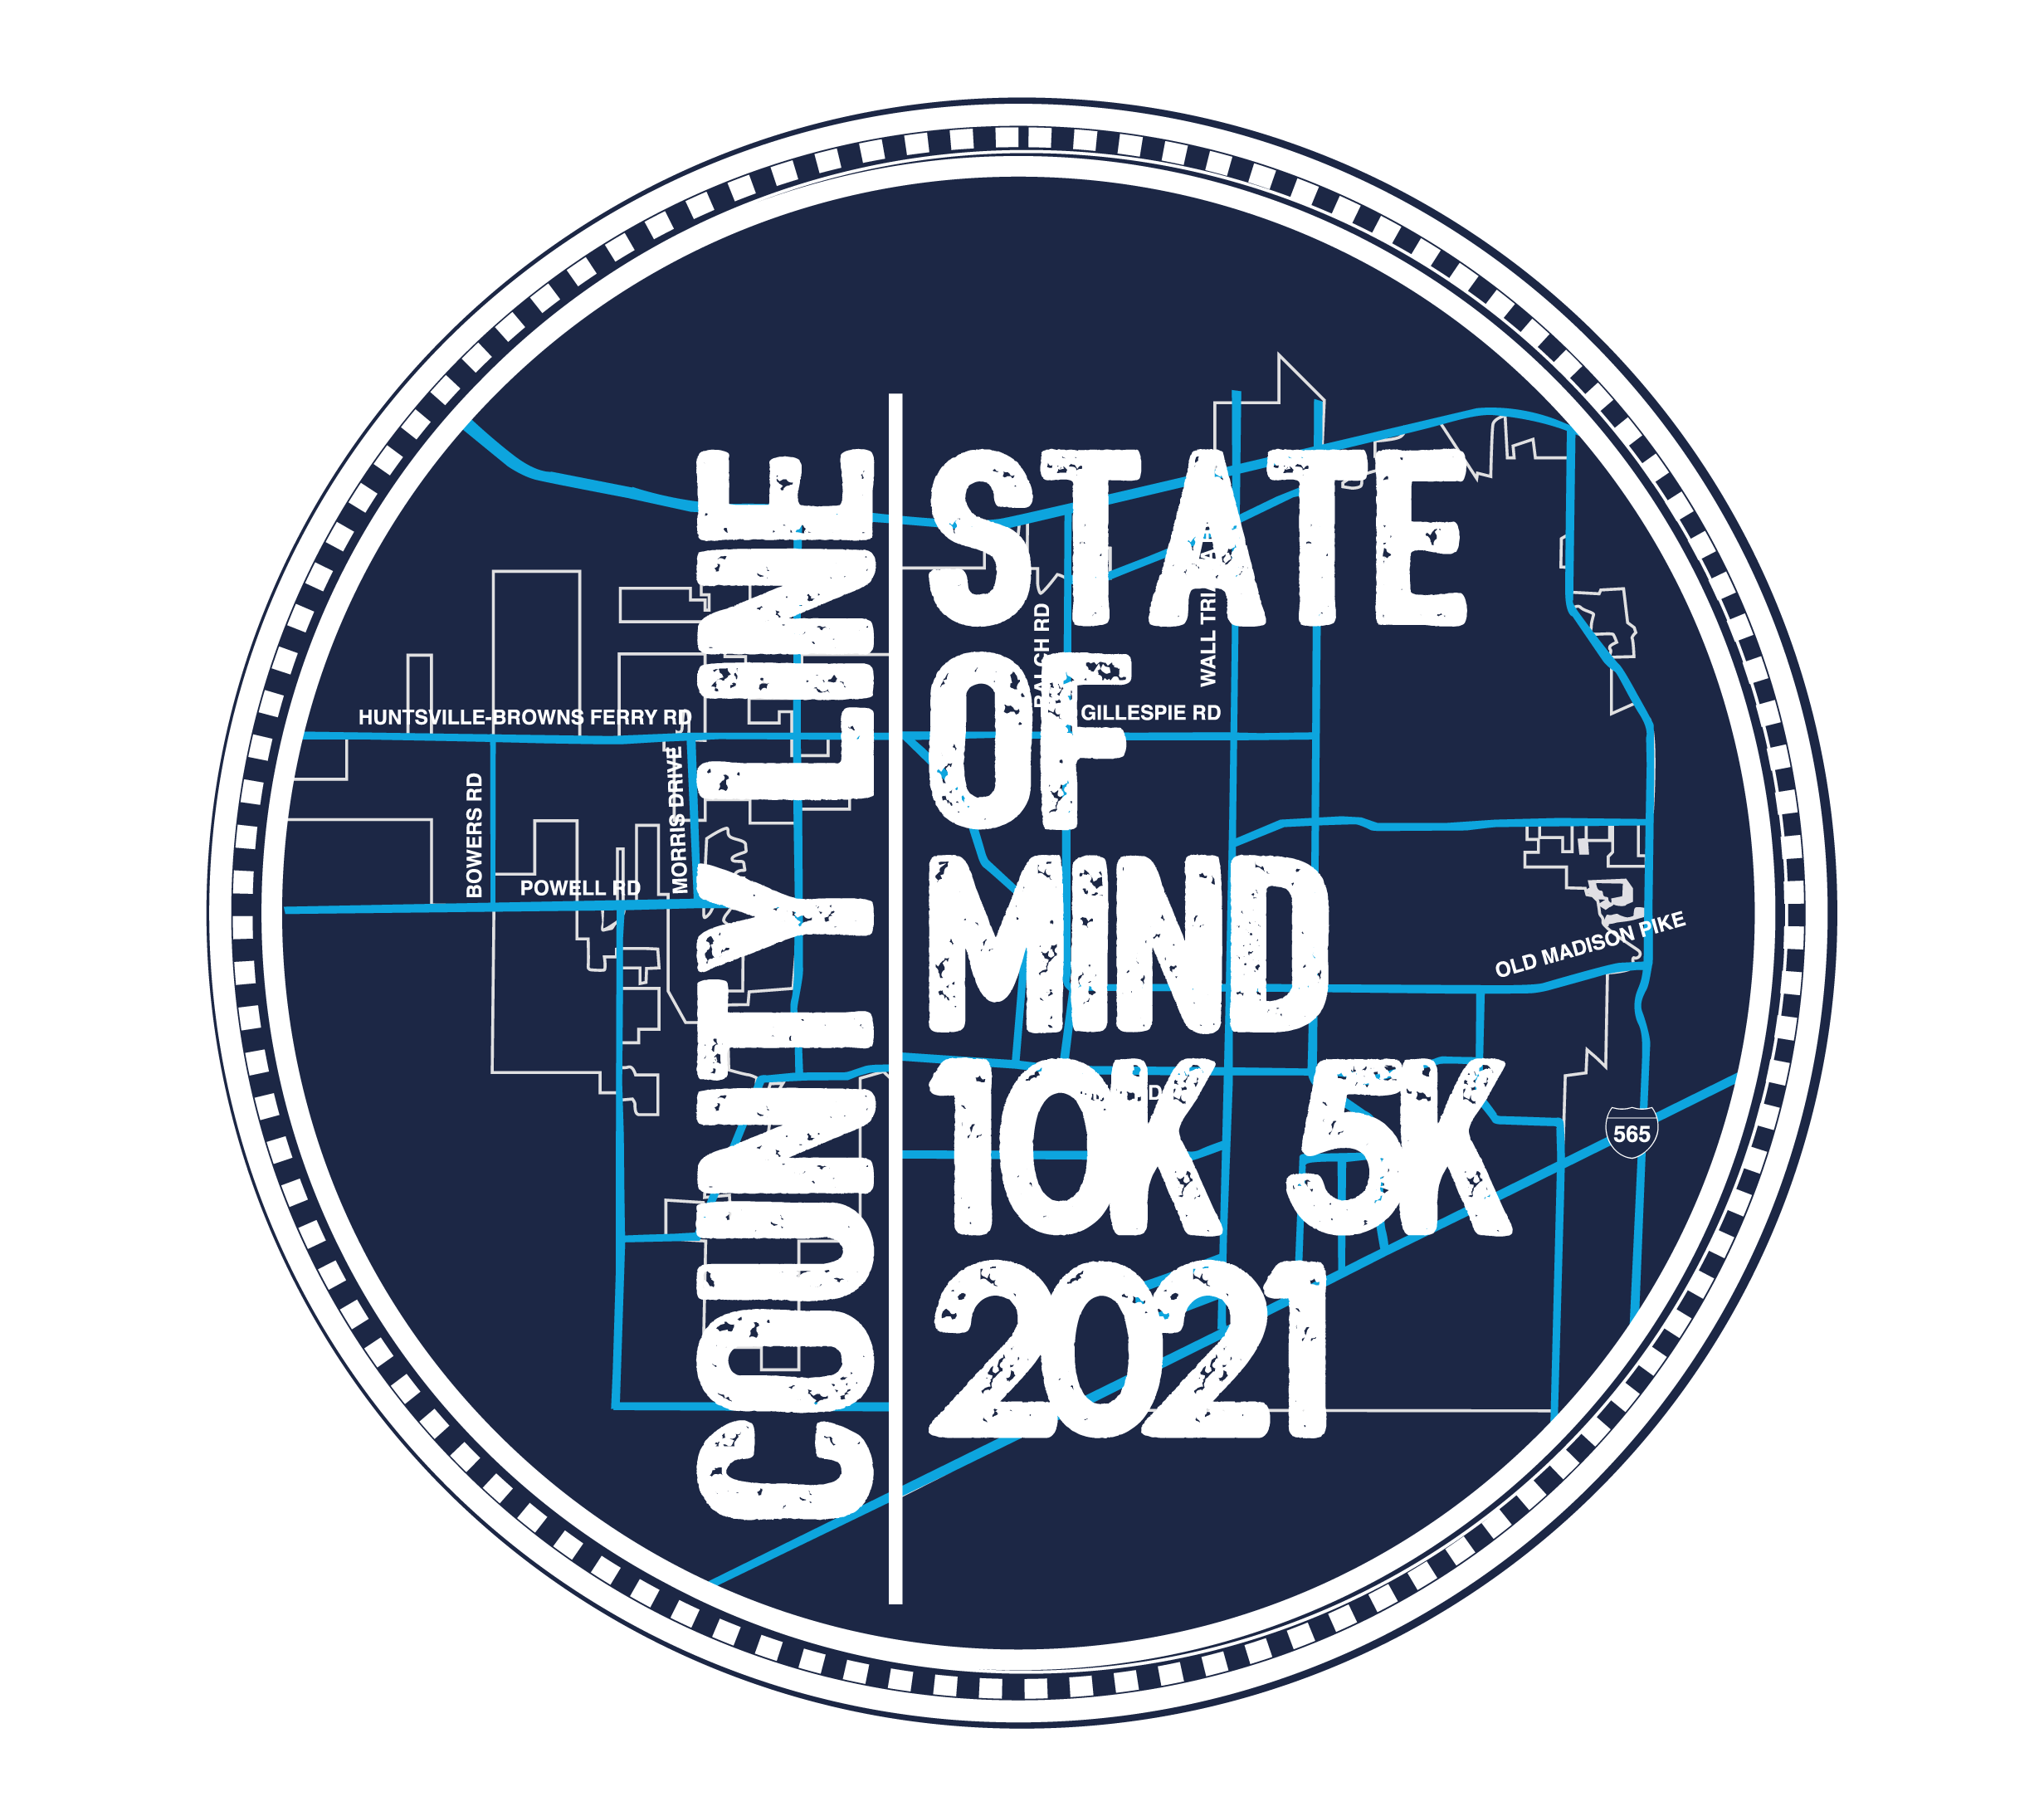 All Things Madison | All about Madison's County Line State of Mind Road Race Event